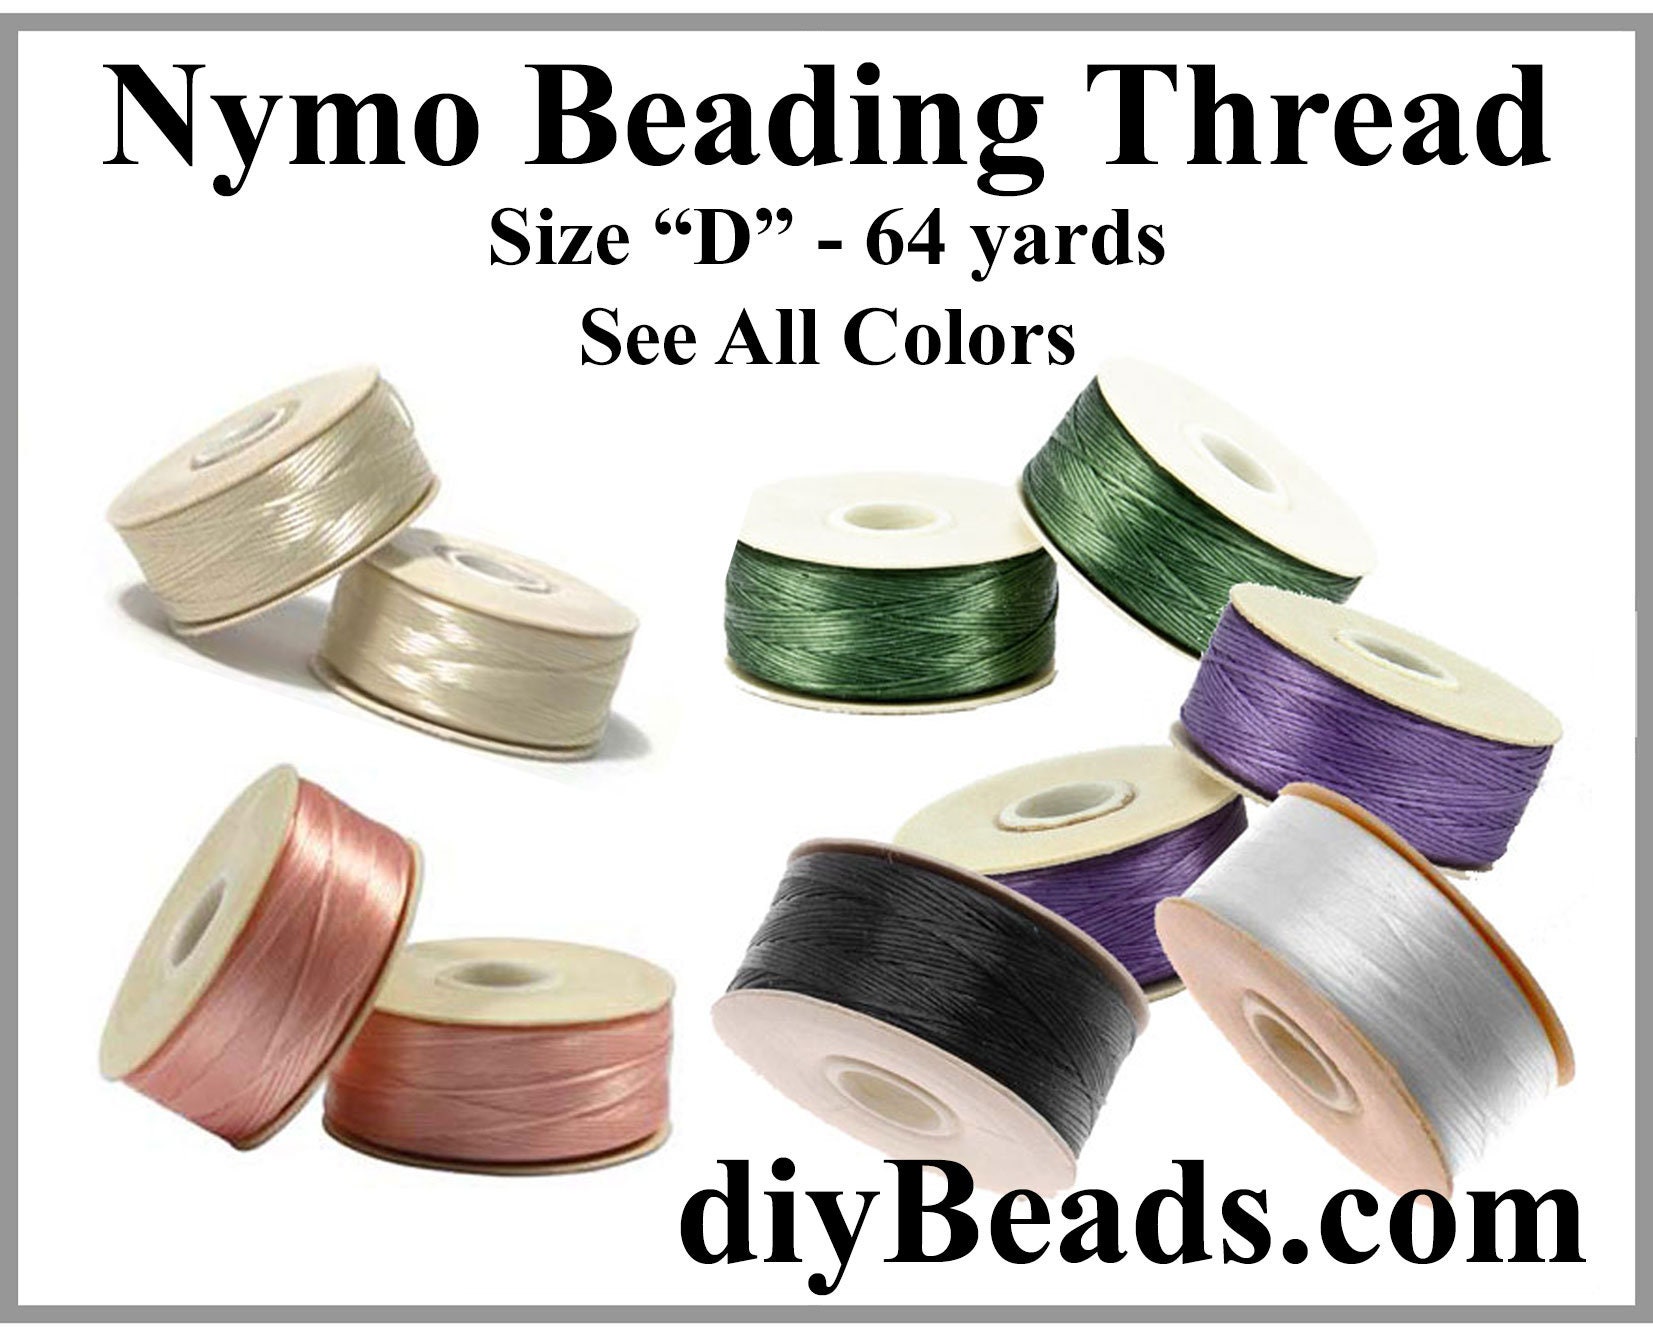 NYMO BEADING THREAD Size d Each Bobbin Contains 64 Yards Sold per